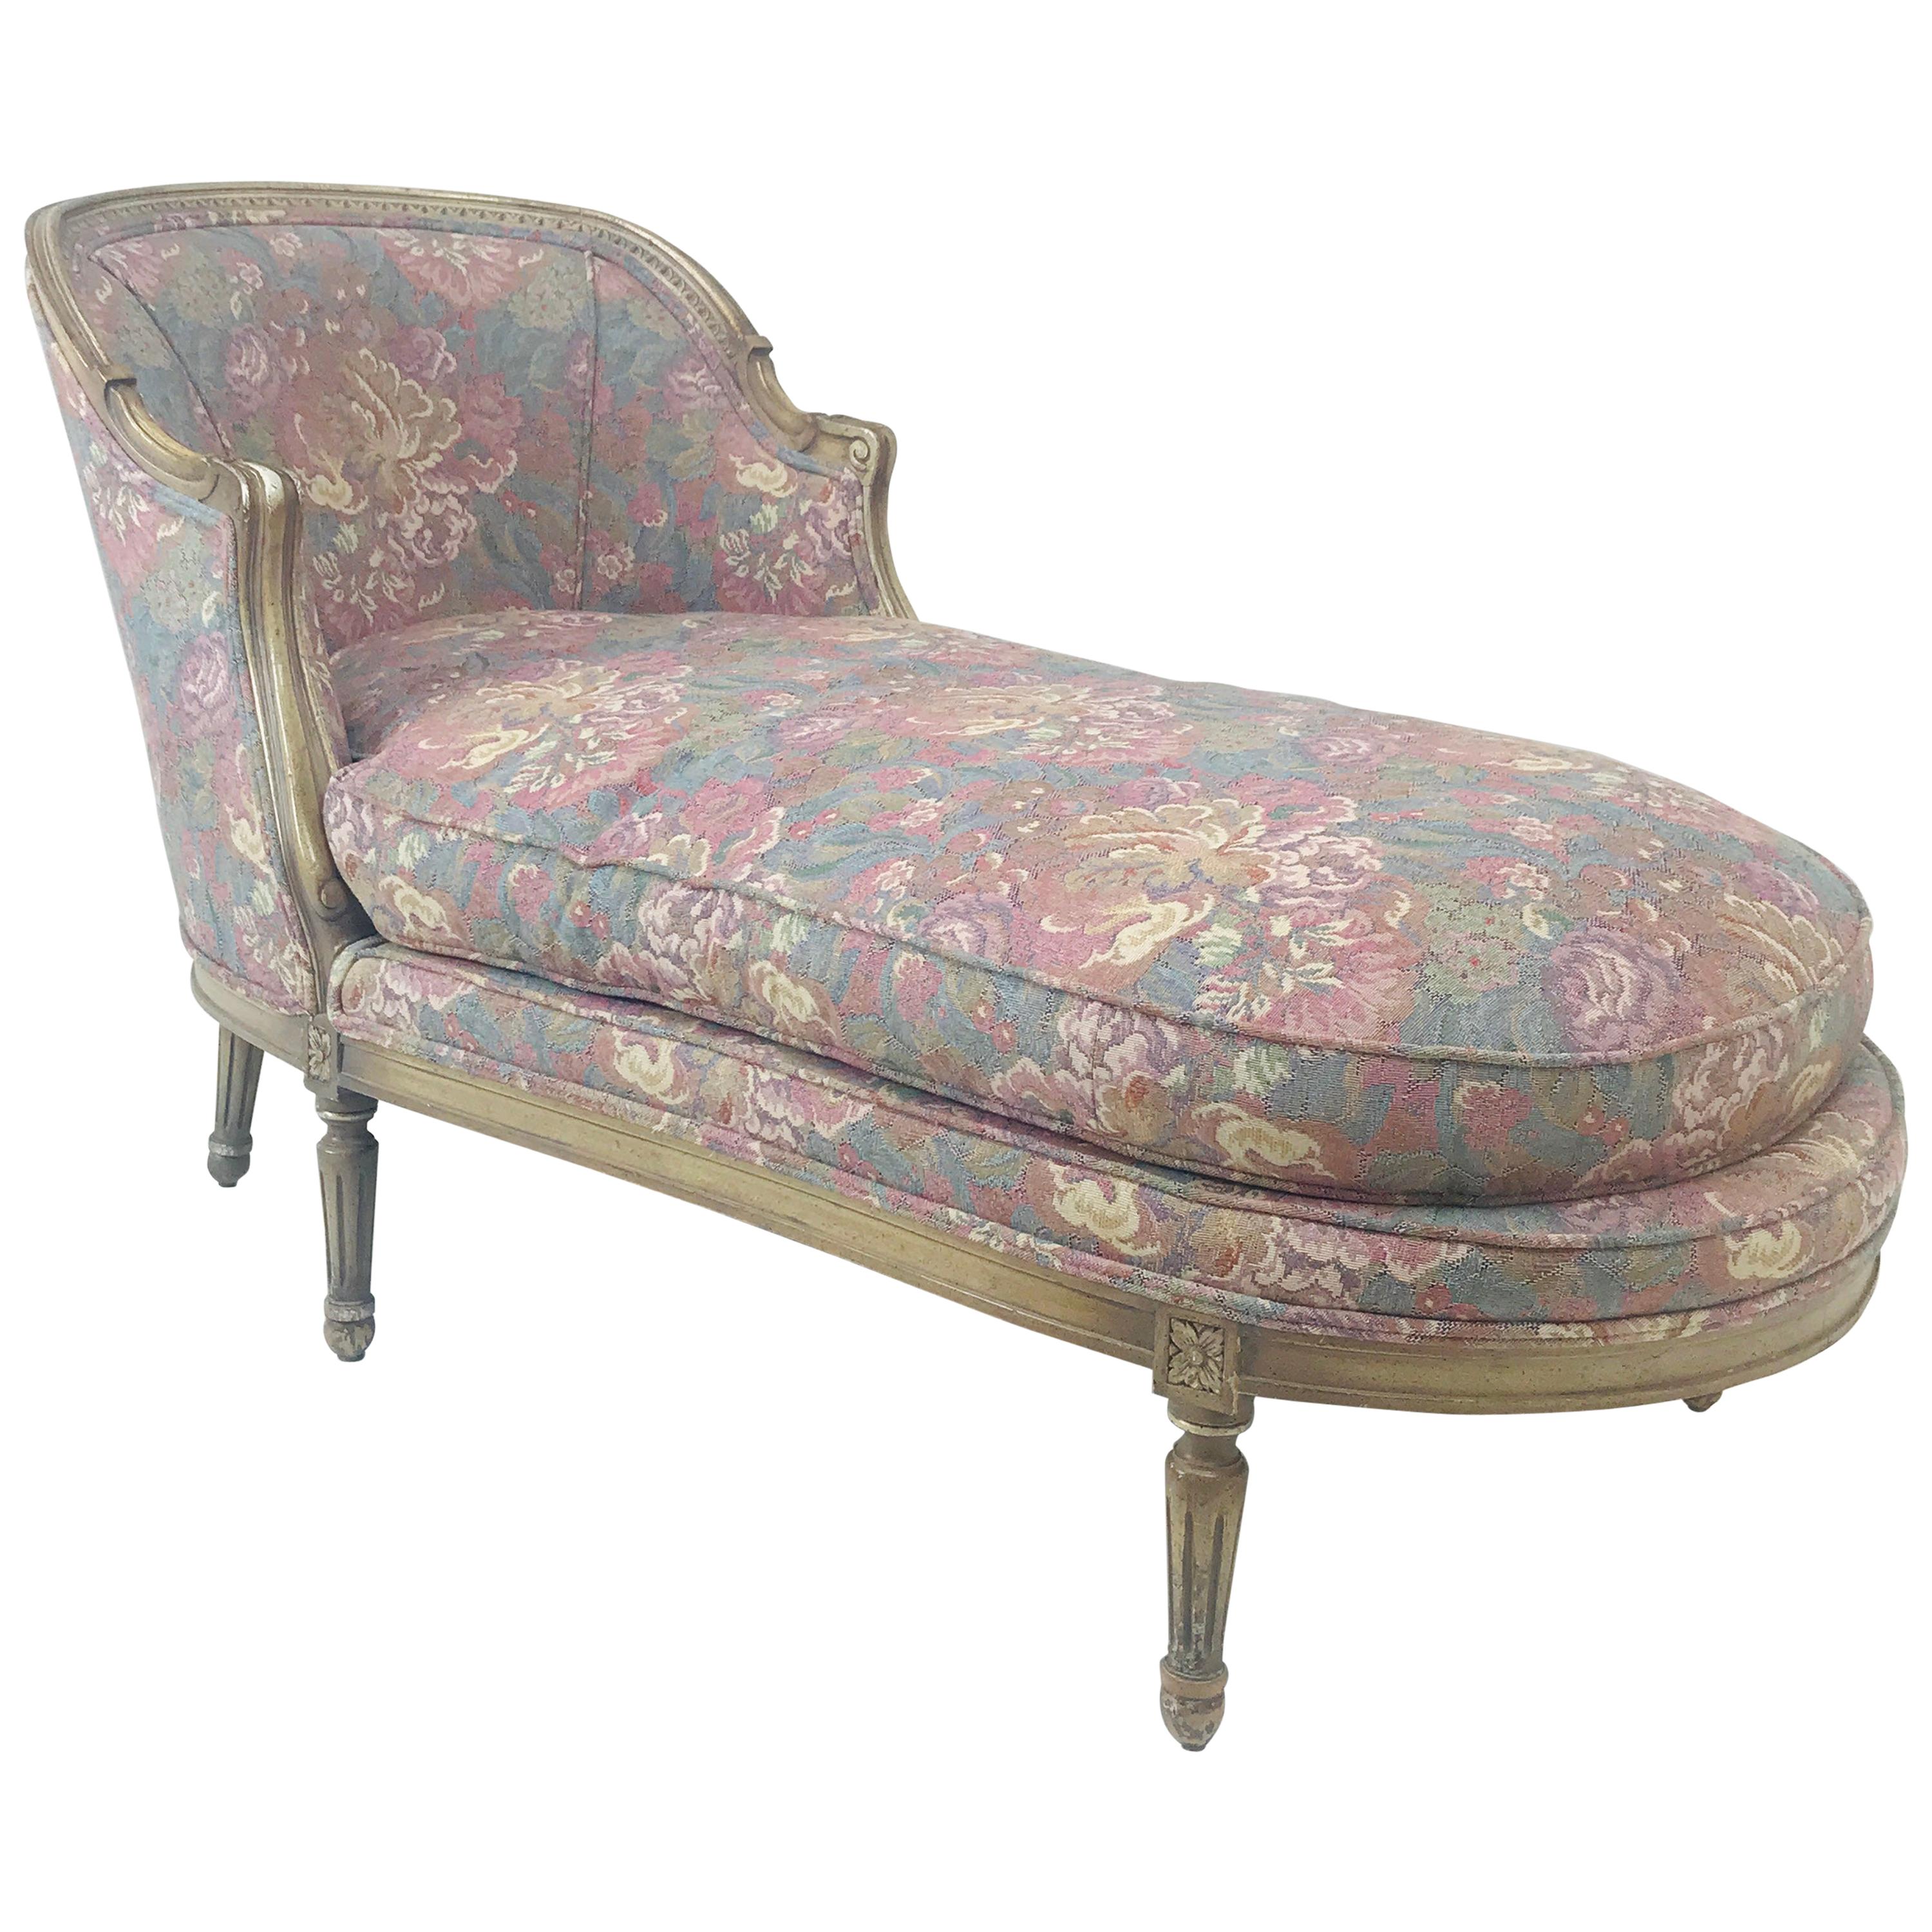 French Louis XVI Style Floral Chaise Lounge